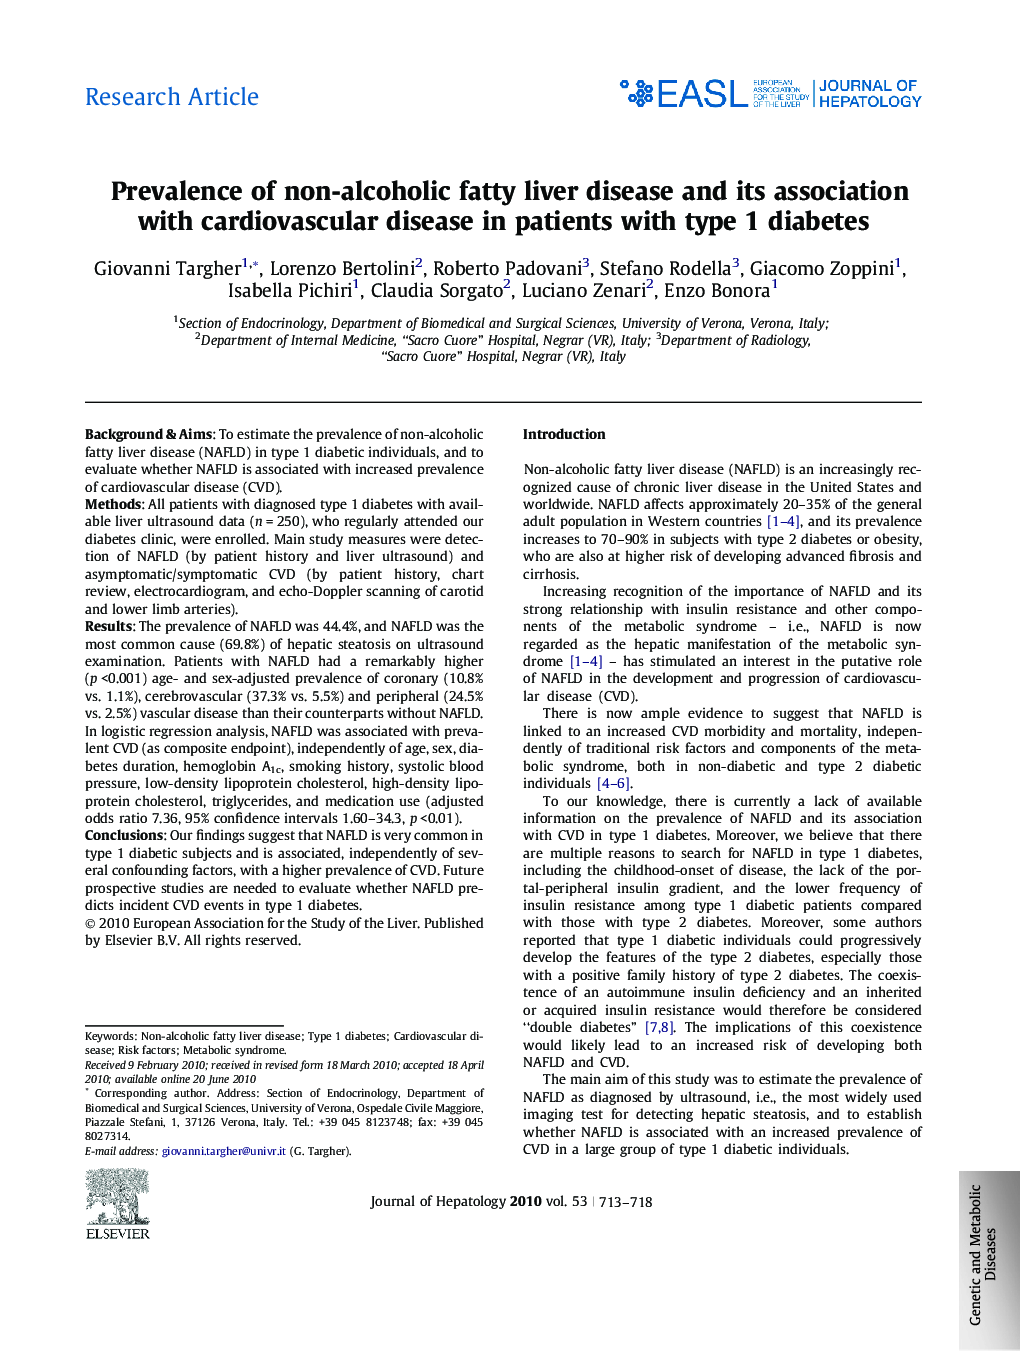 Research ArticlePrevalence of non-alcoholic fatty liver disease and its association with cardiovascular disease in patients with type 1 diabetes